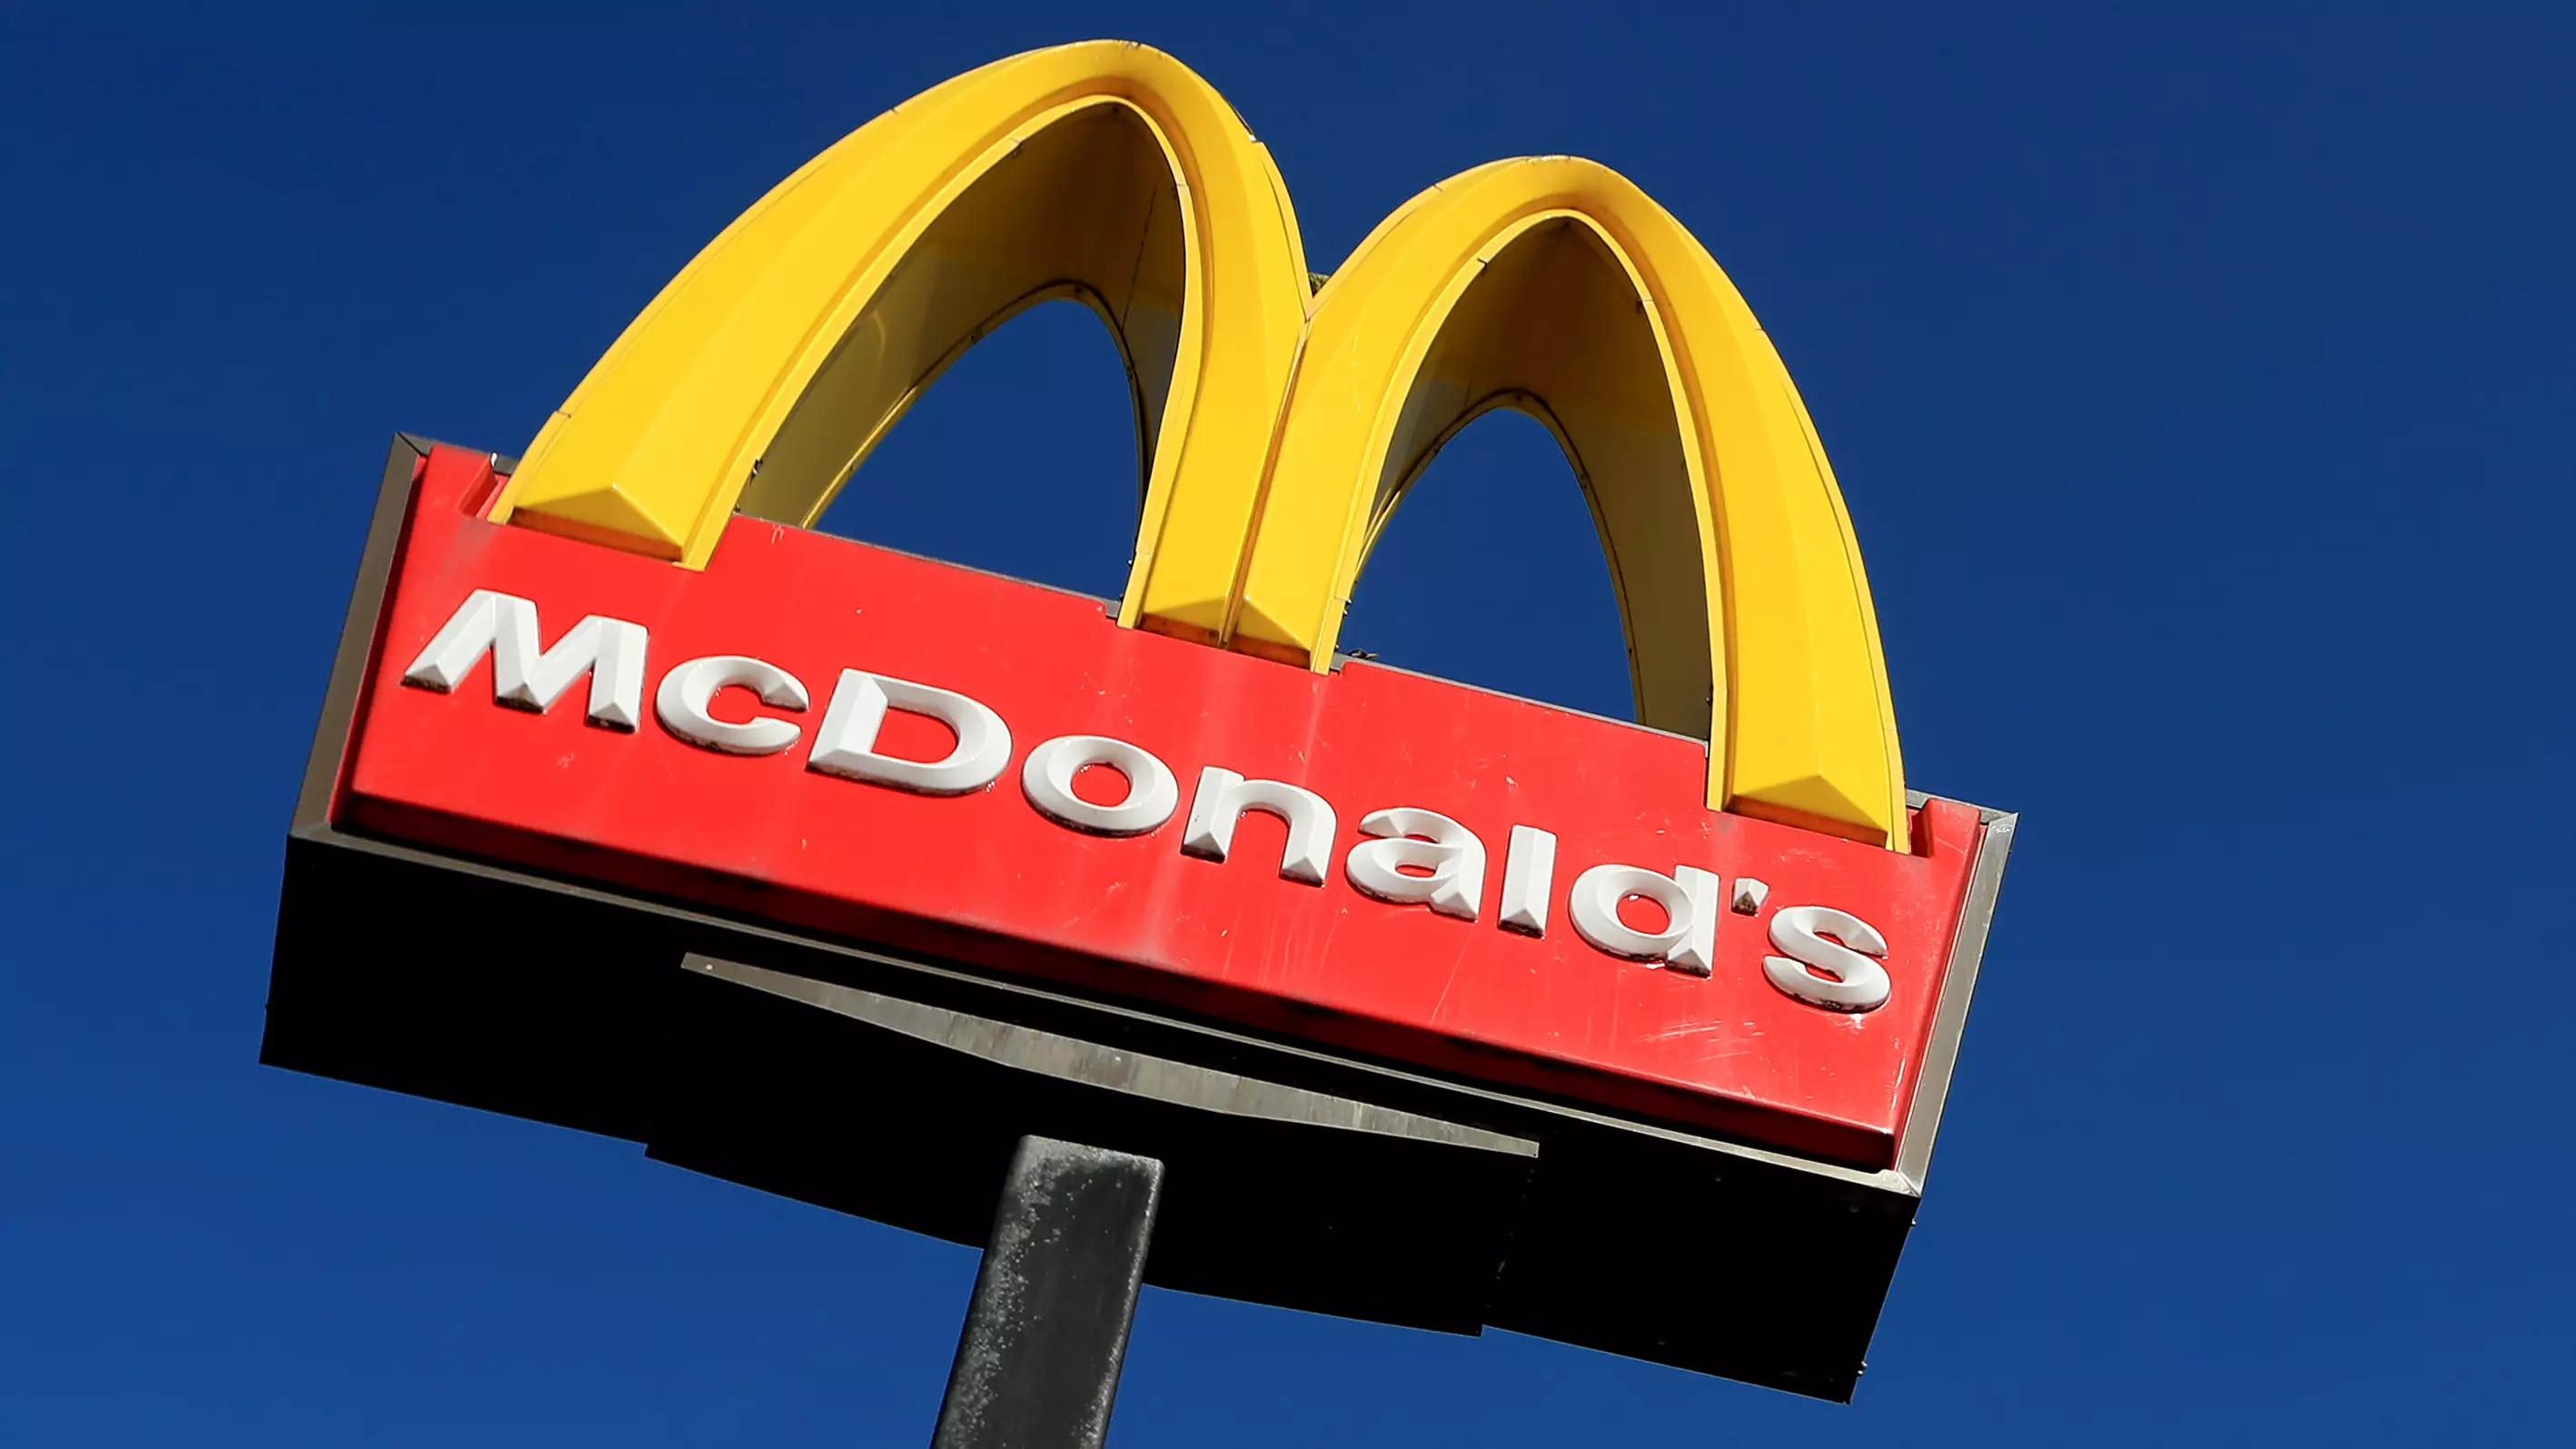 McDonald's Confirms That 800 Restaurants Will Stay Open Past 10pm Curfew